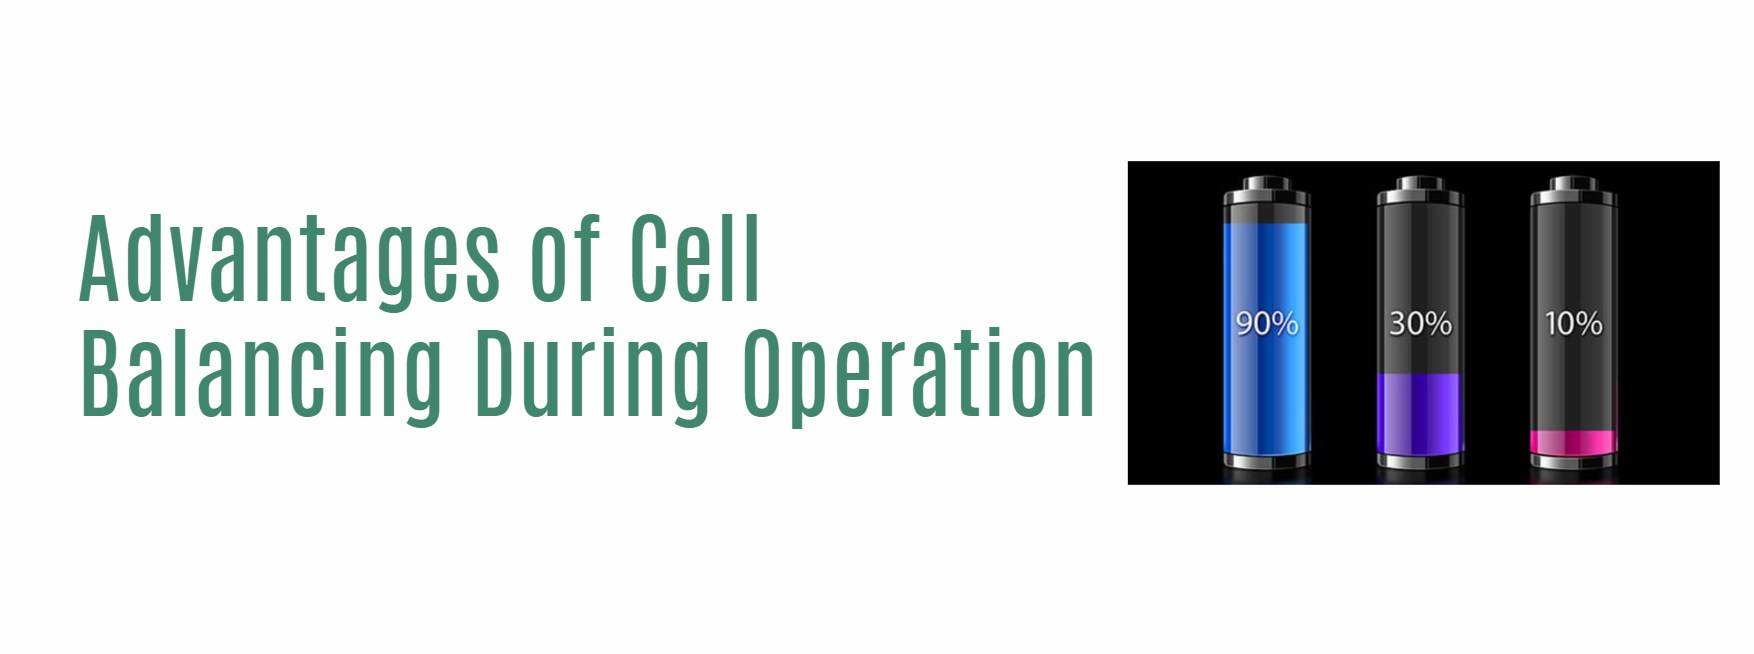 Advantages of Cell Balancing During Operation